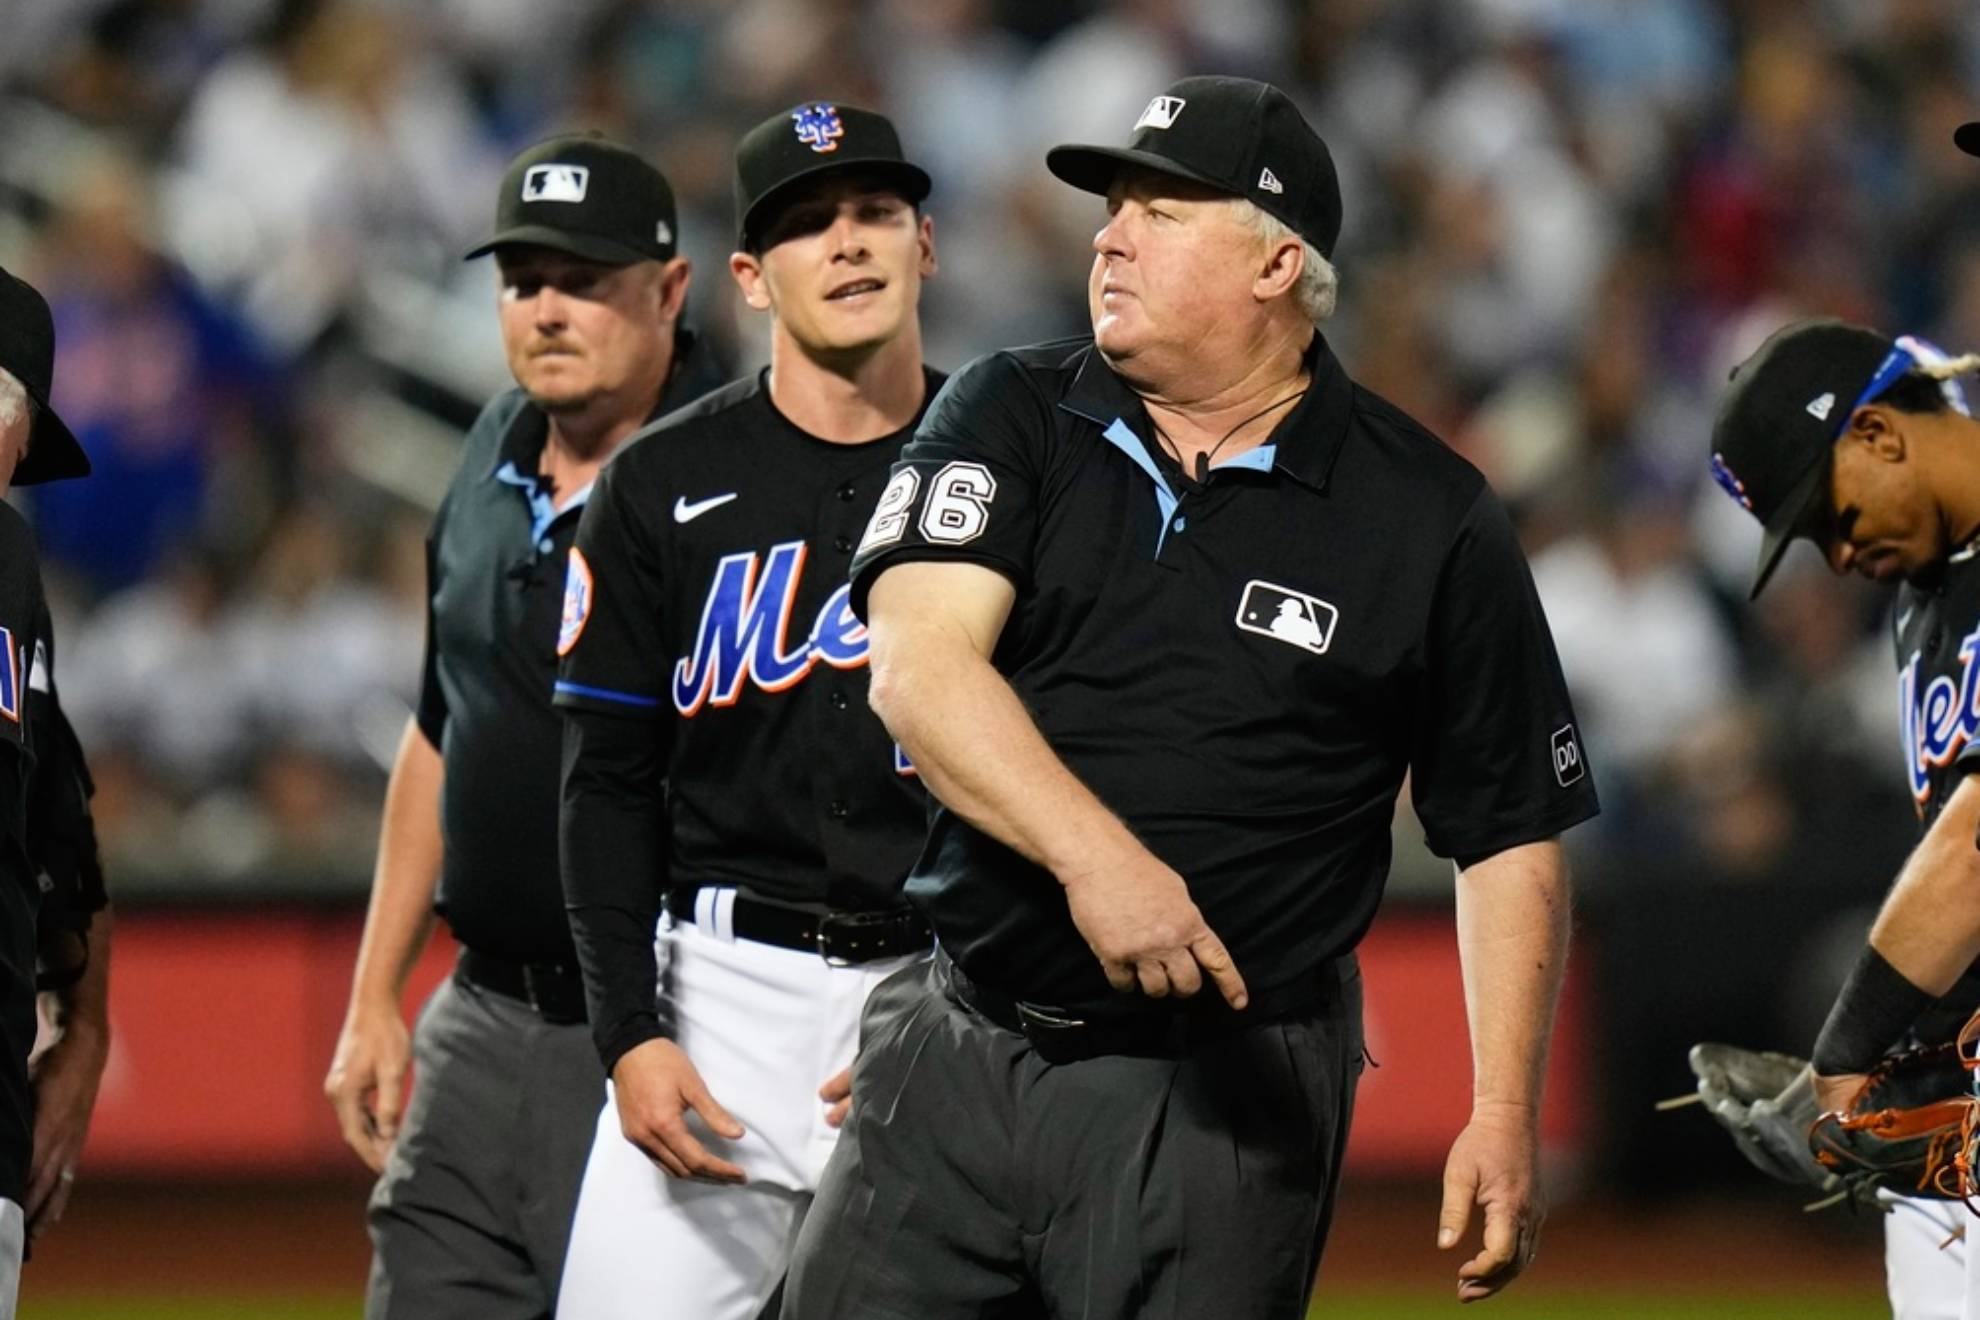 Umpire Bill Miller ejects New York Mets relief pitcher Drew Smith